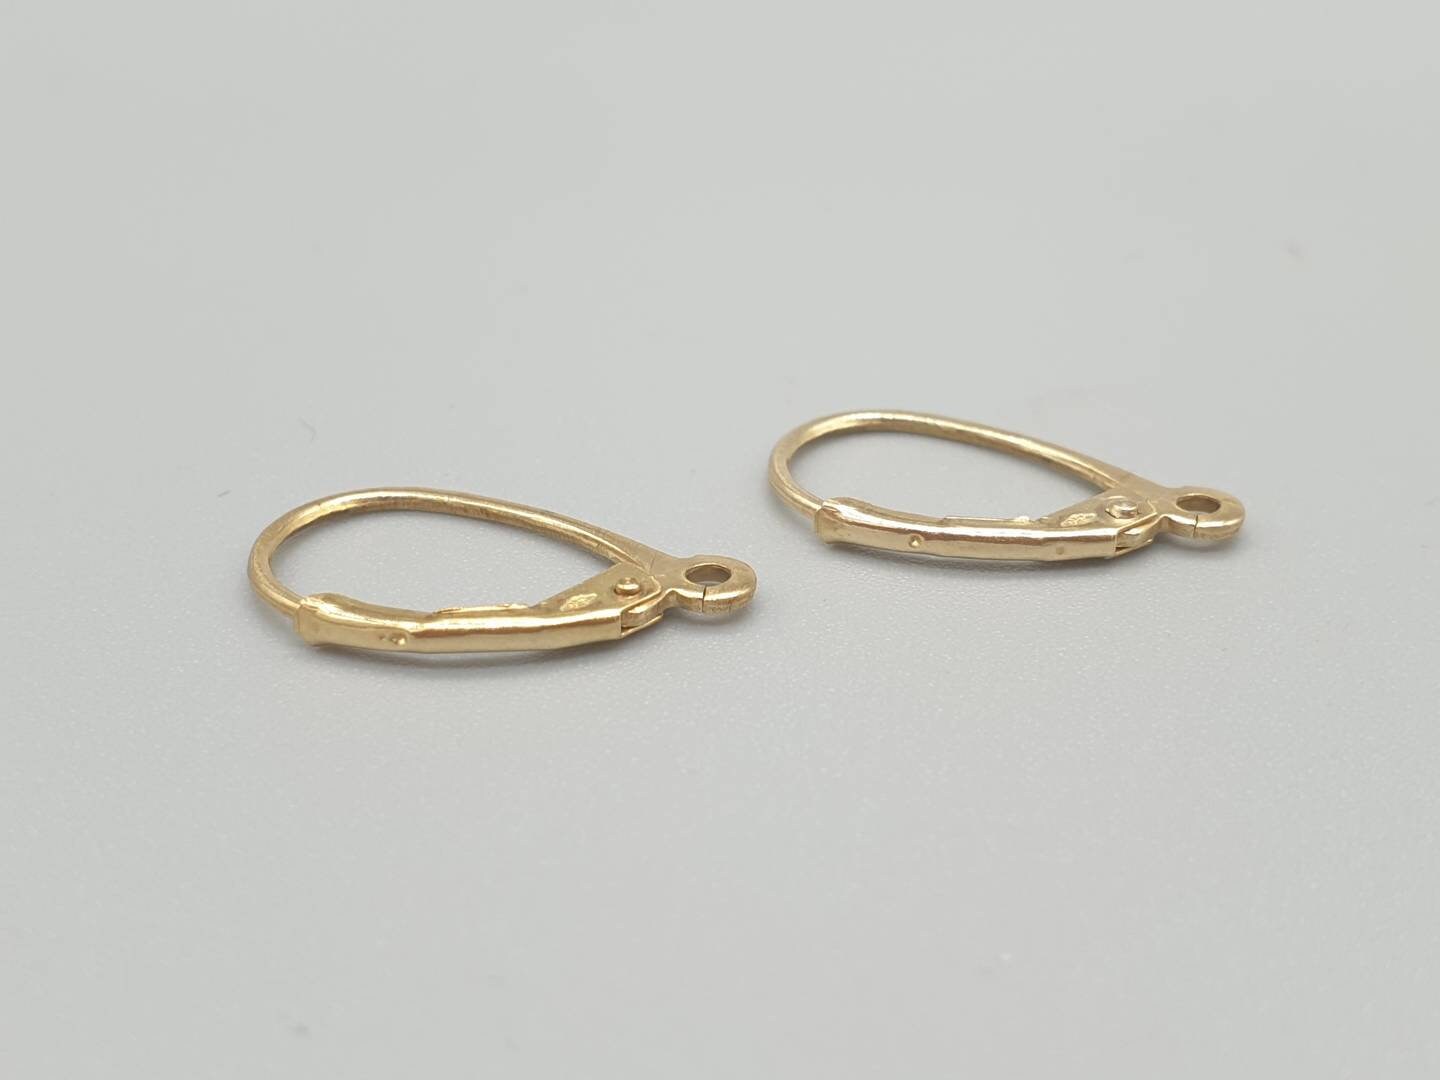 A Pair of 9ct White Gold Continental Lever Back Ear Hooks With Hanging Loop ~ Supplies For Customising your own Gold Jewellery